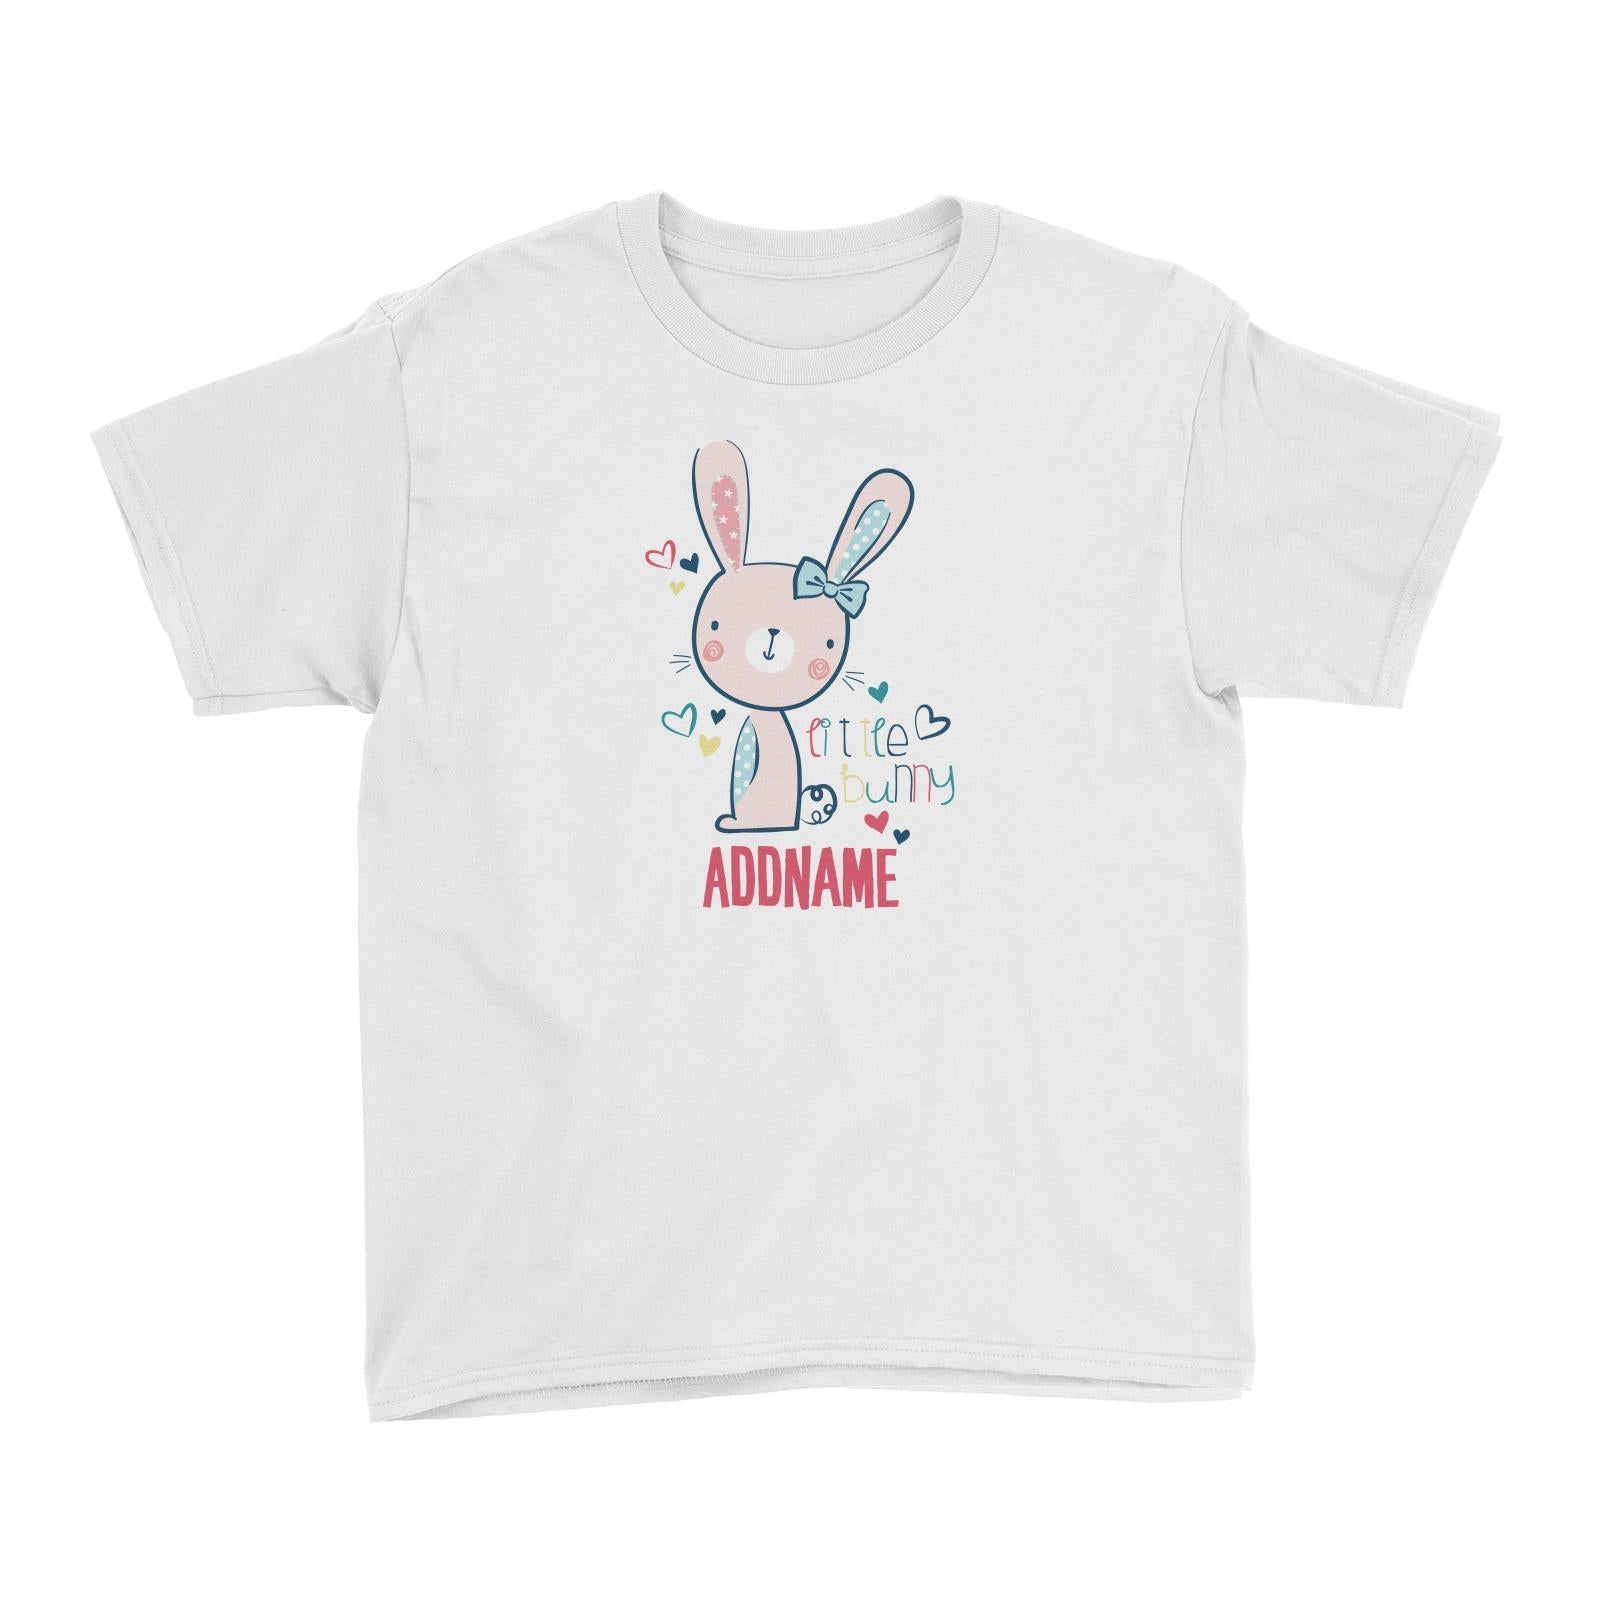 Cool Vibrant Series Cute Little Bunny Addname Kid's T-Shirt